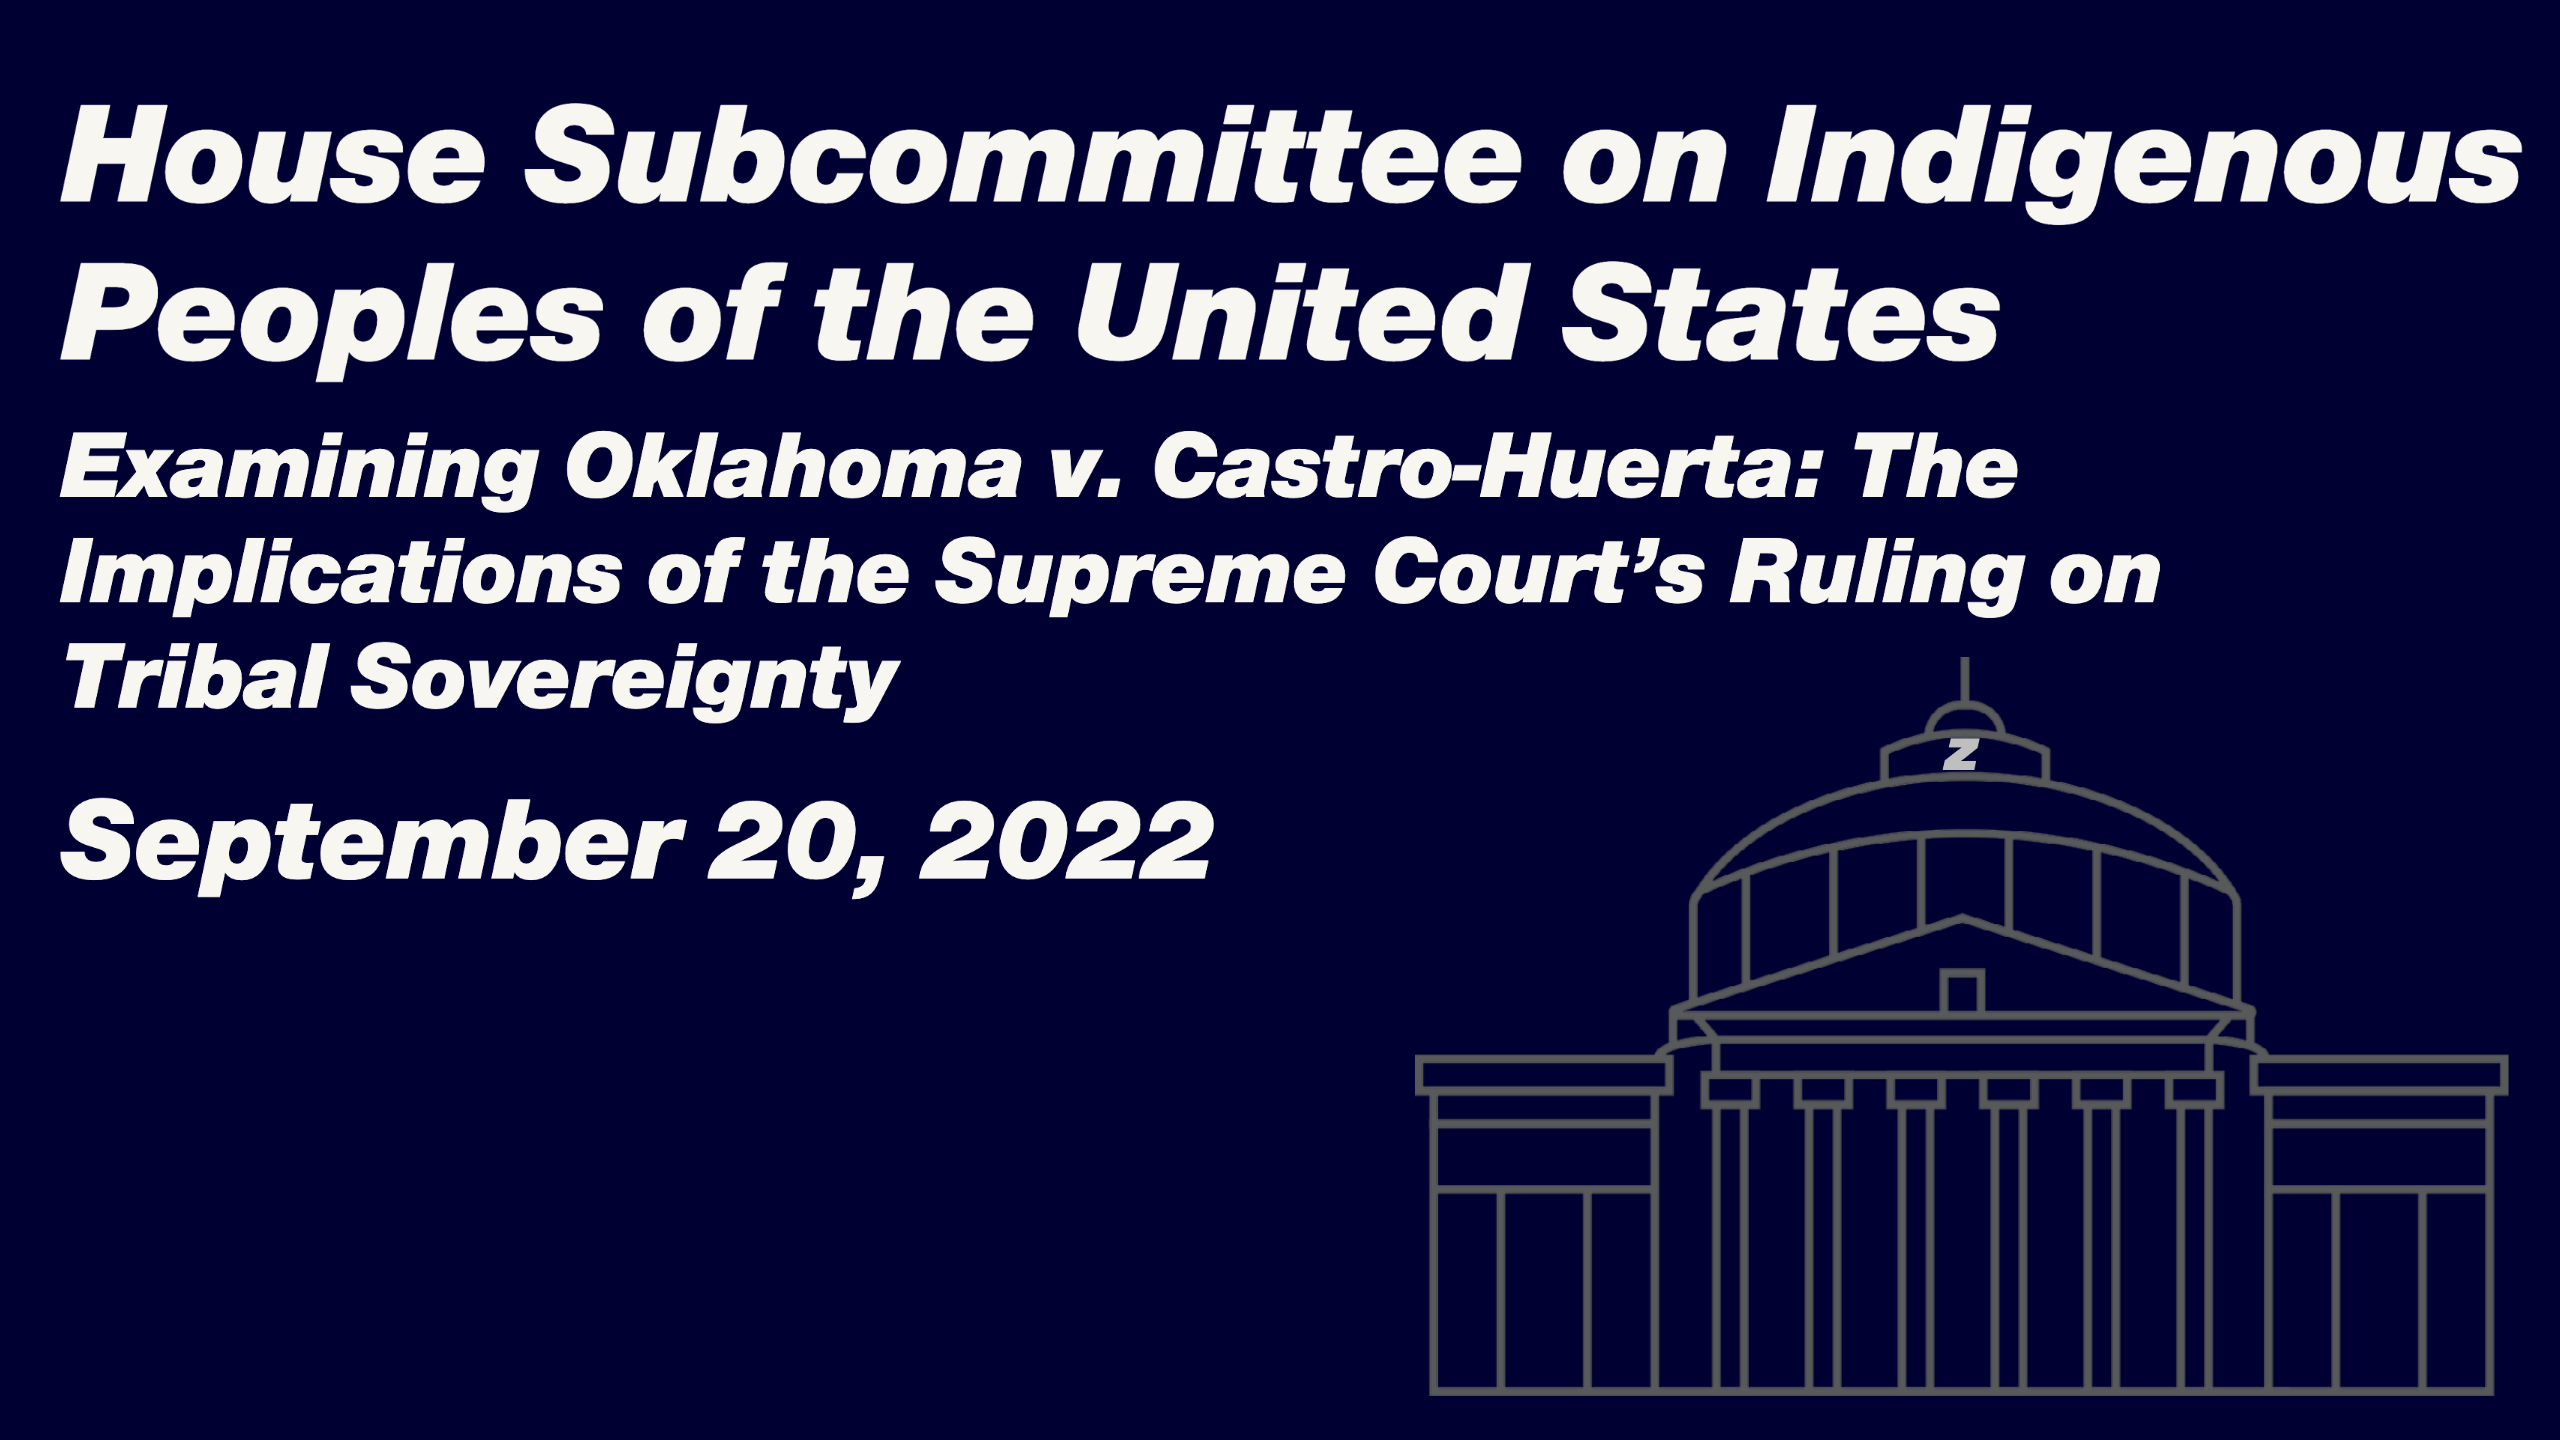 House Subcommittee on Indigenous Peoples of the United States - Examining Oklahoma v. Castro-Huerta: The Implications of the Supreme Court's Ruling on Tribal Sovereignty